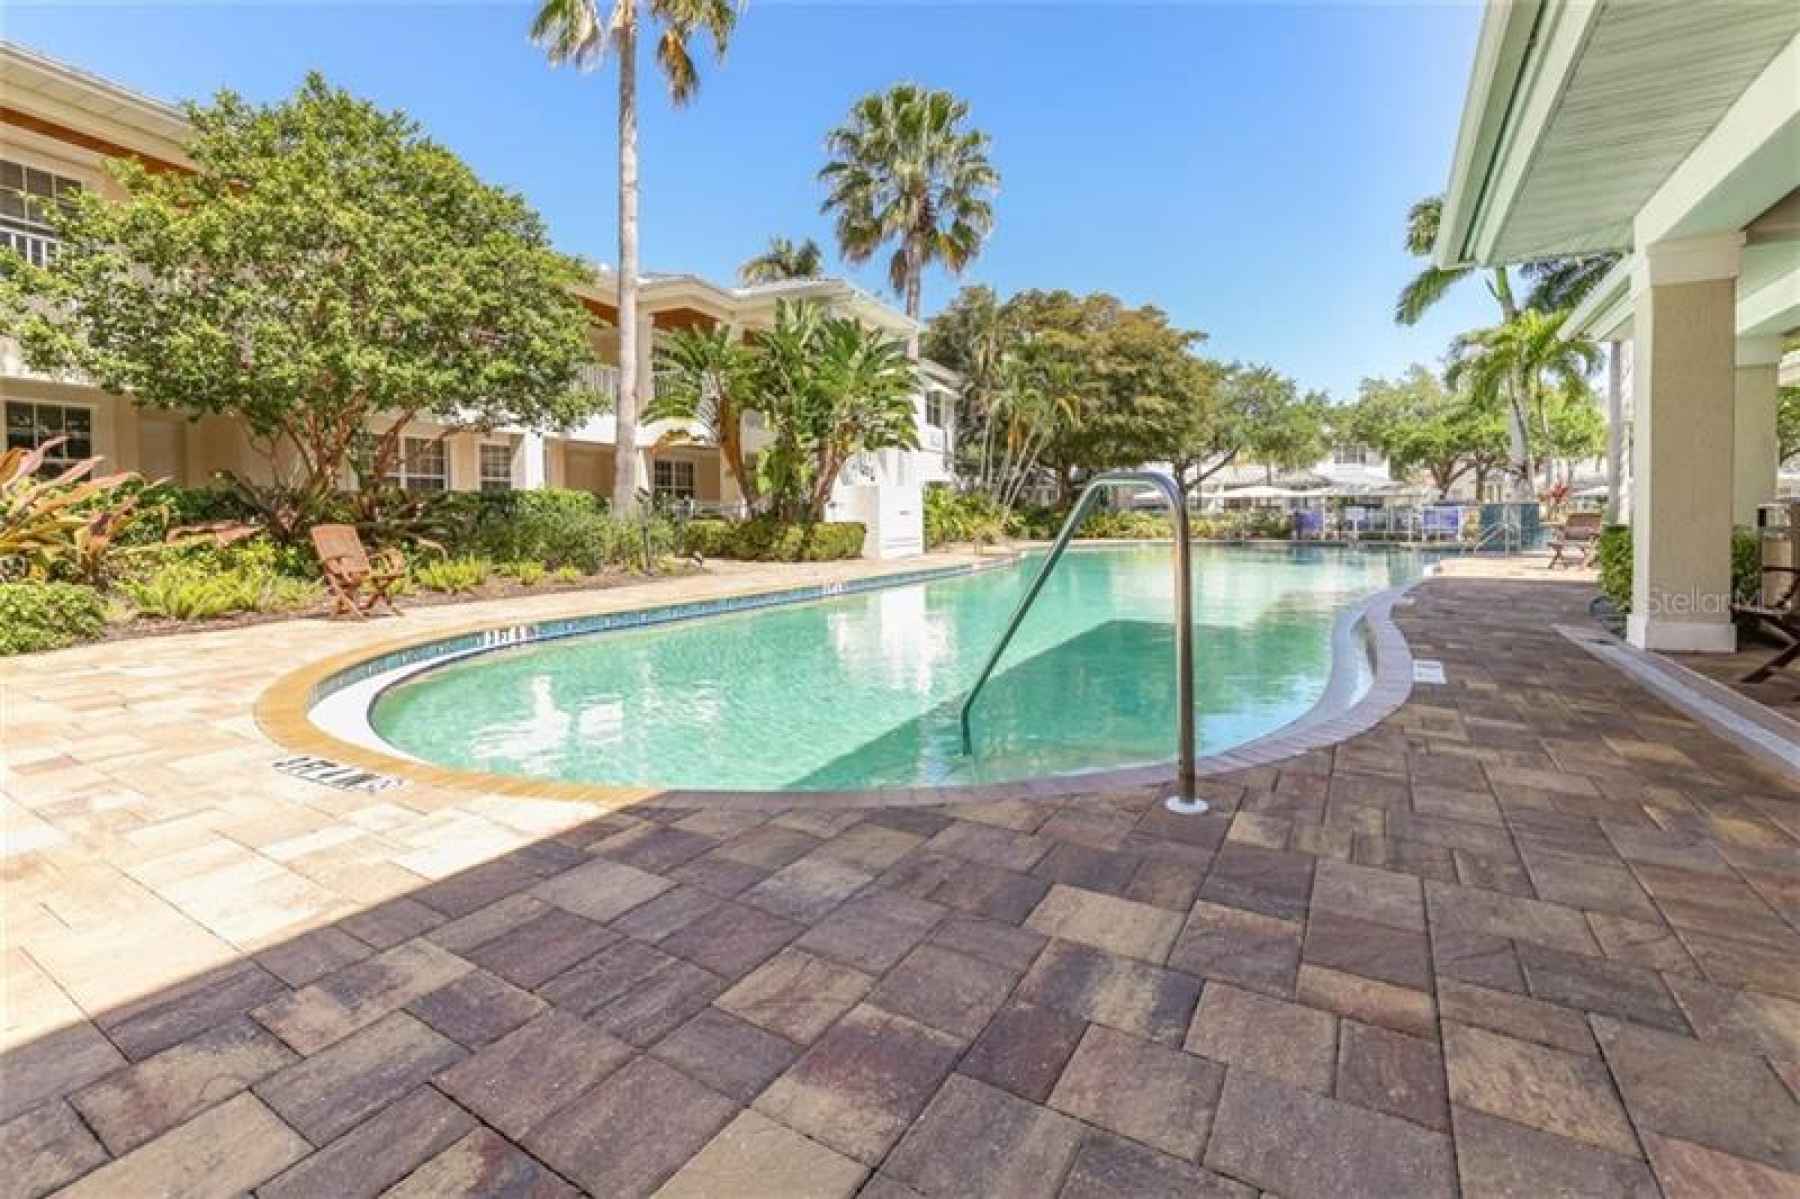 Beautiful pool and spa connected to private clubhouse